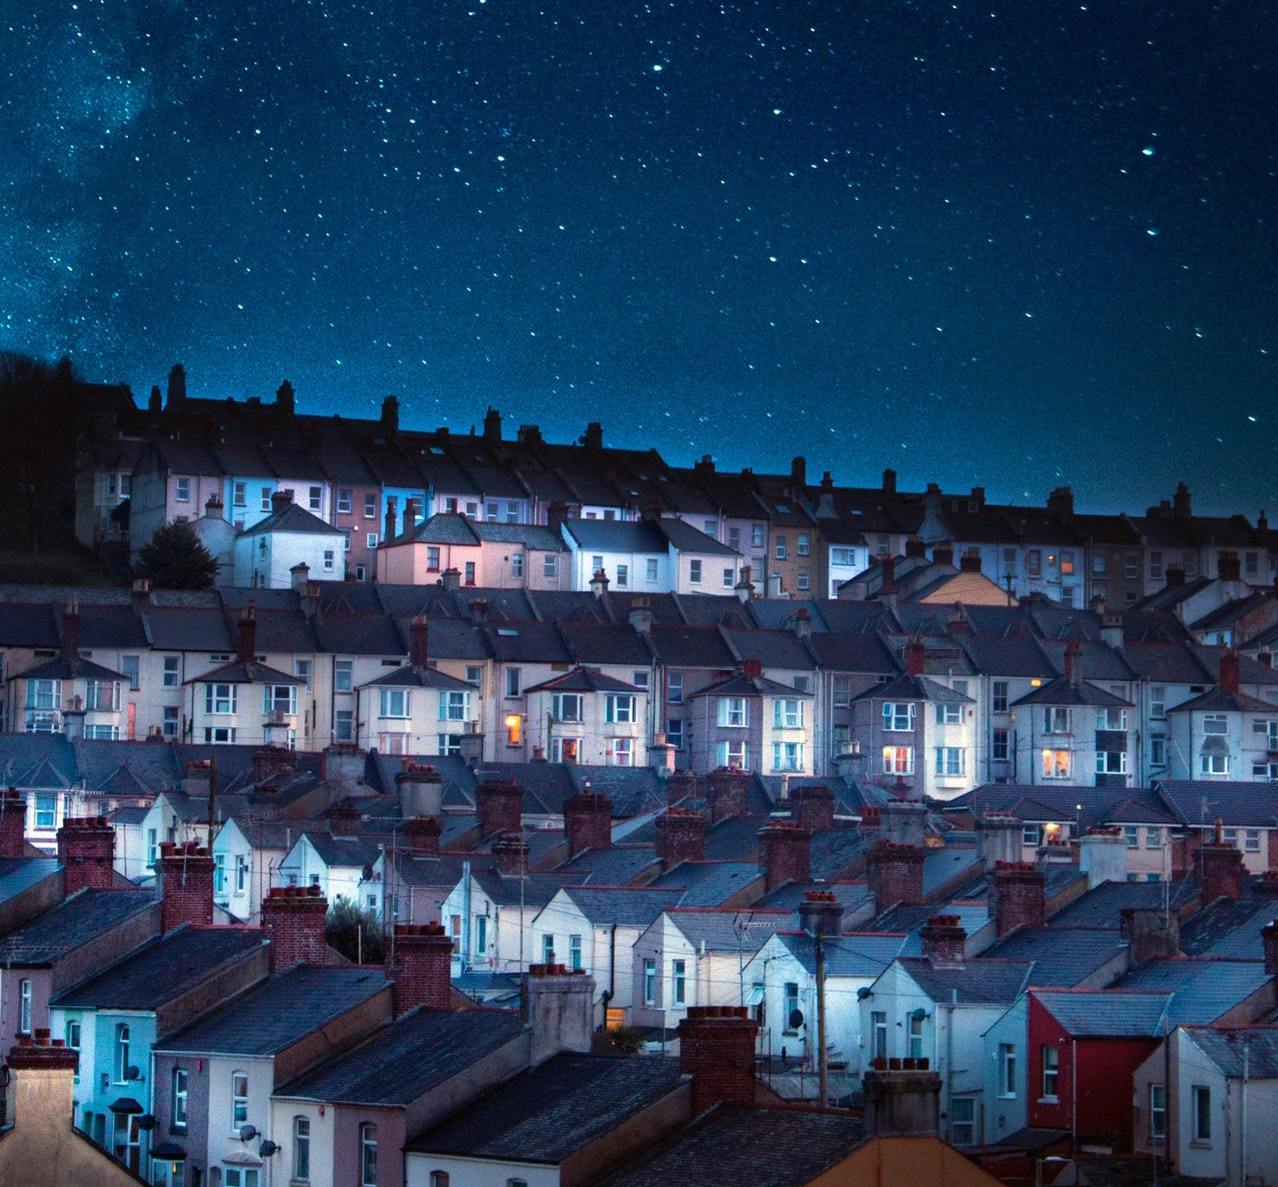 view from night sky over rows of terraced houses